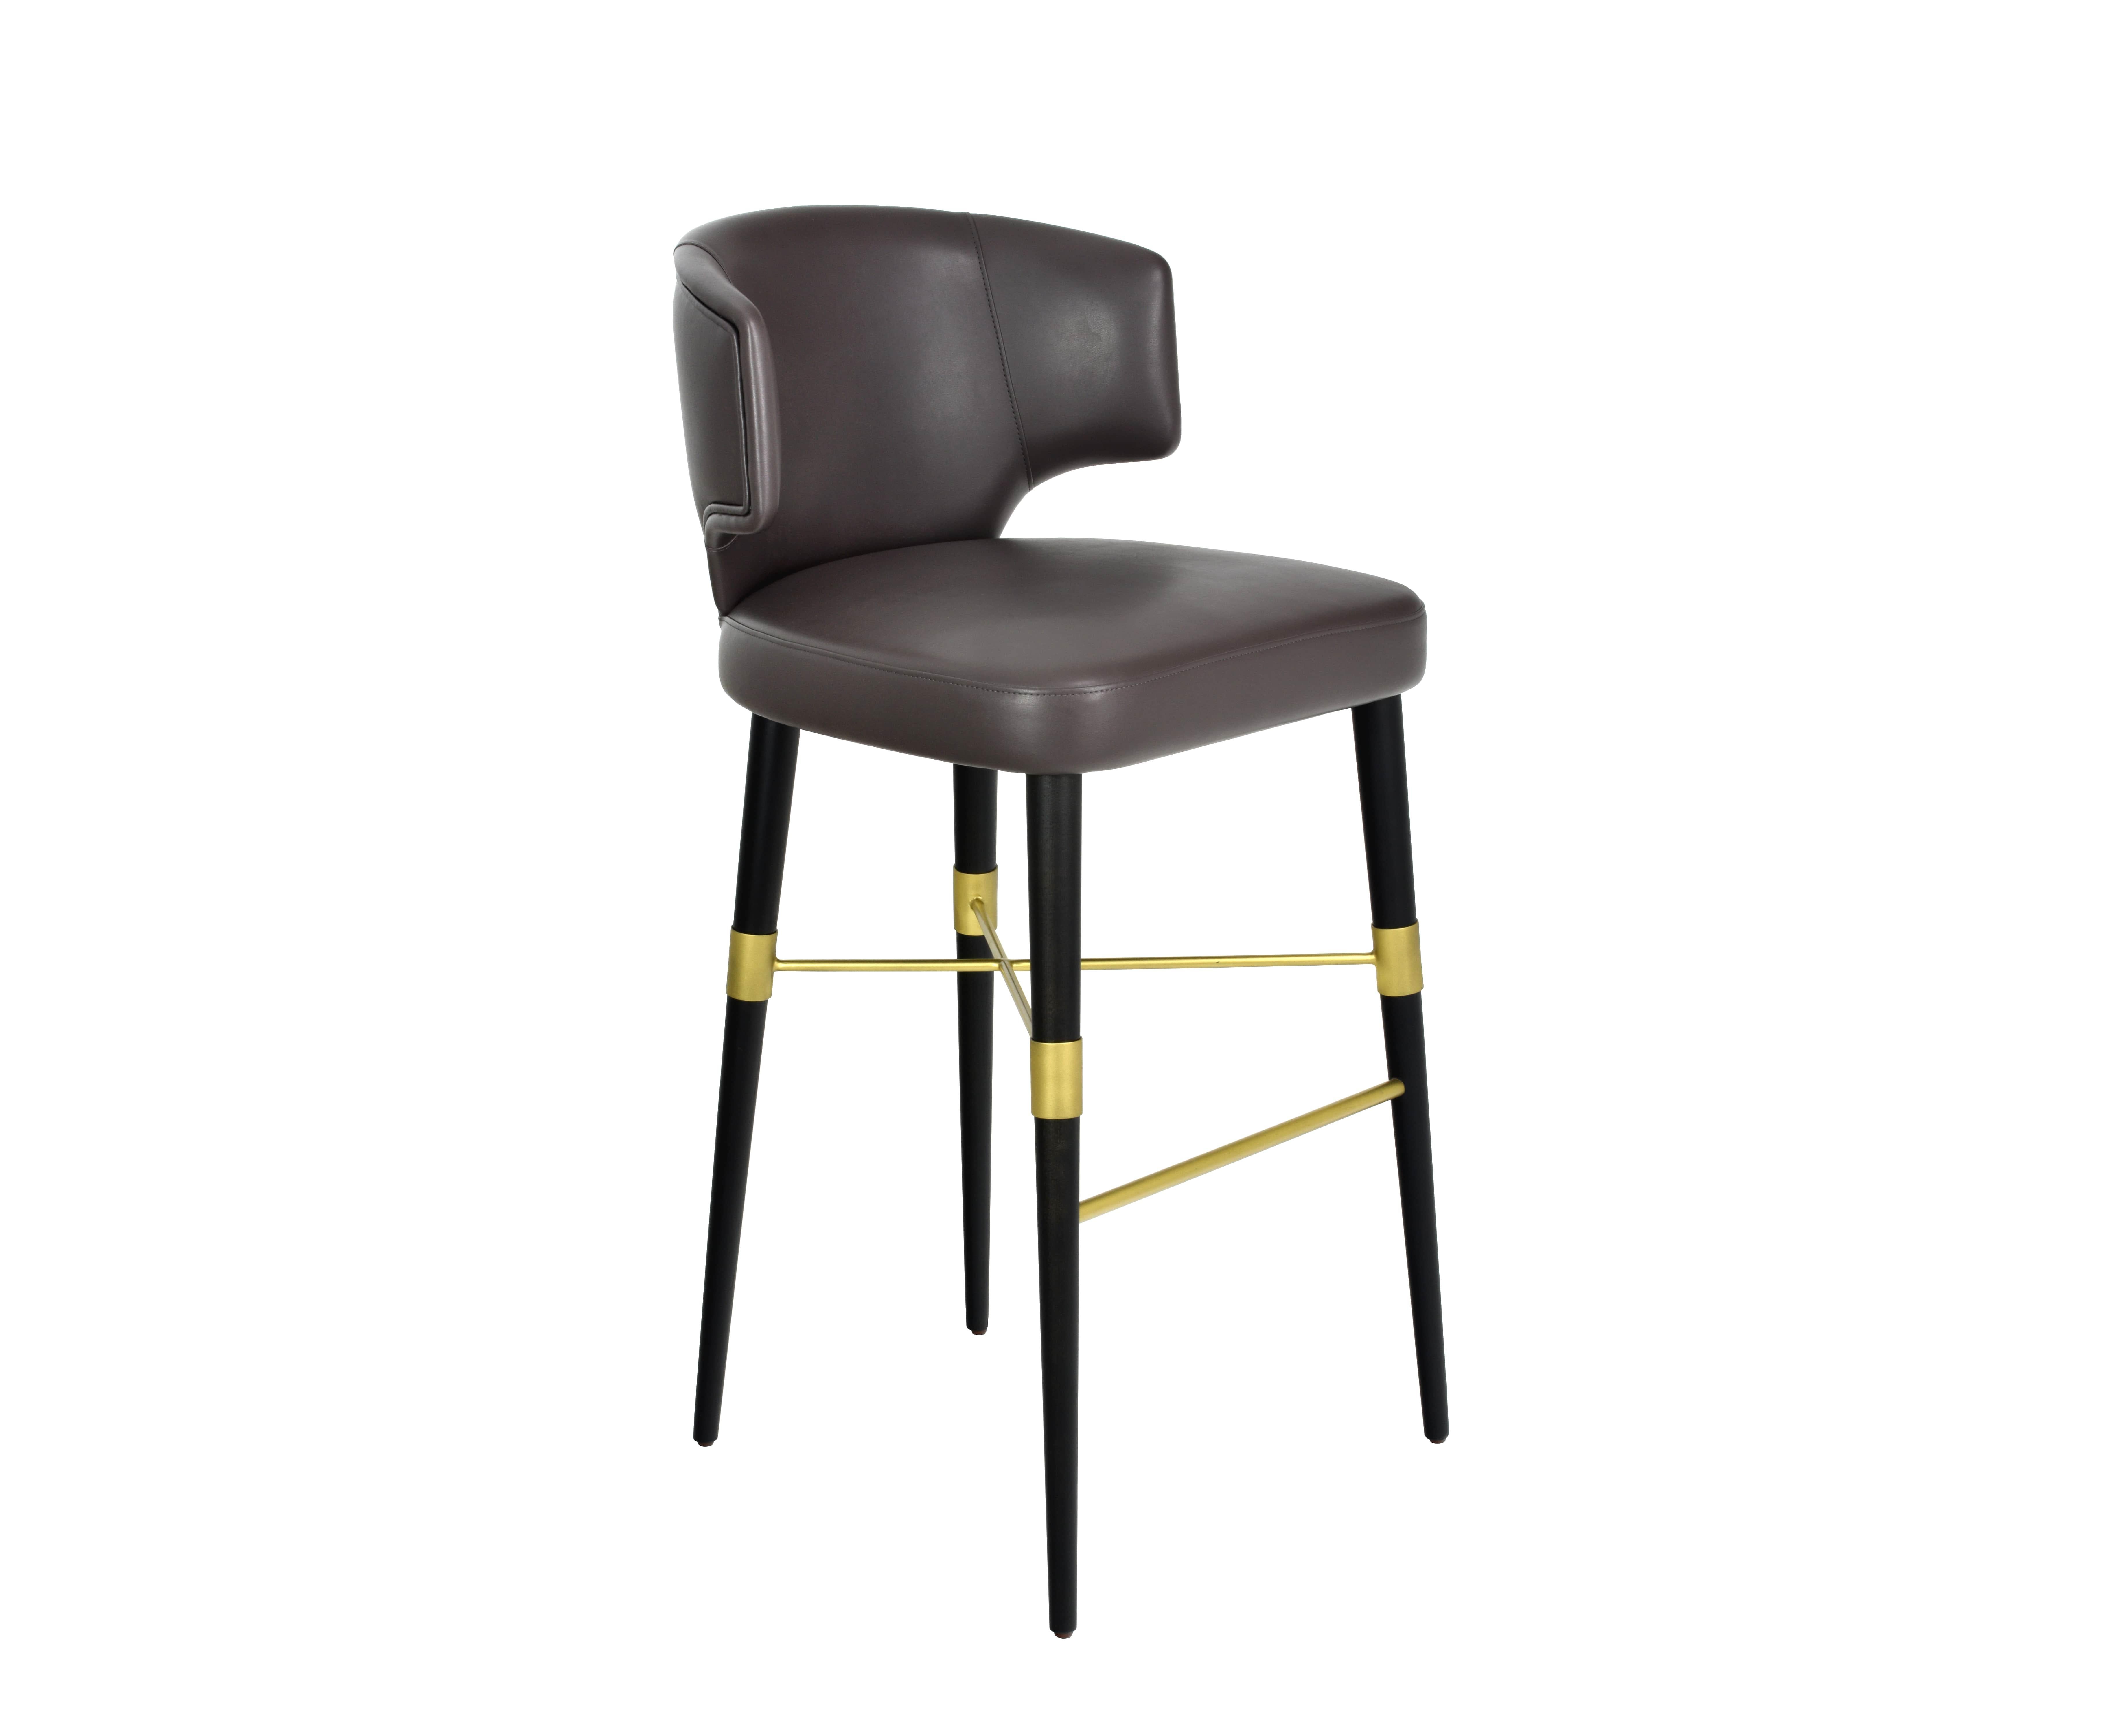 Portuguese York bar stool with metallic details For Sale